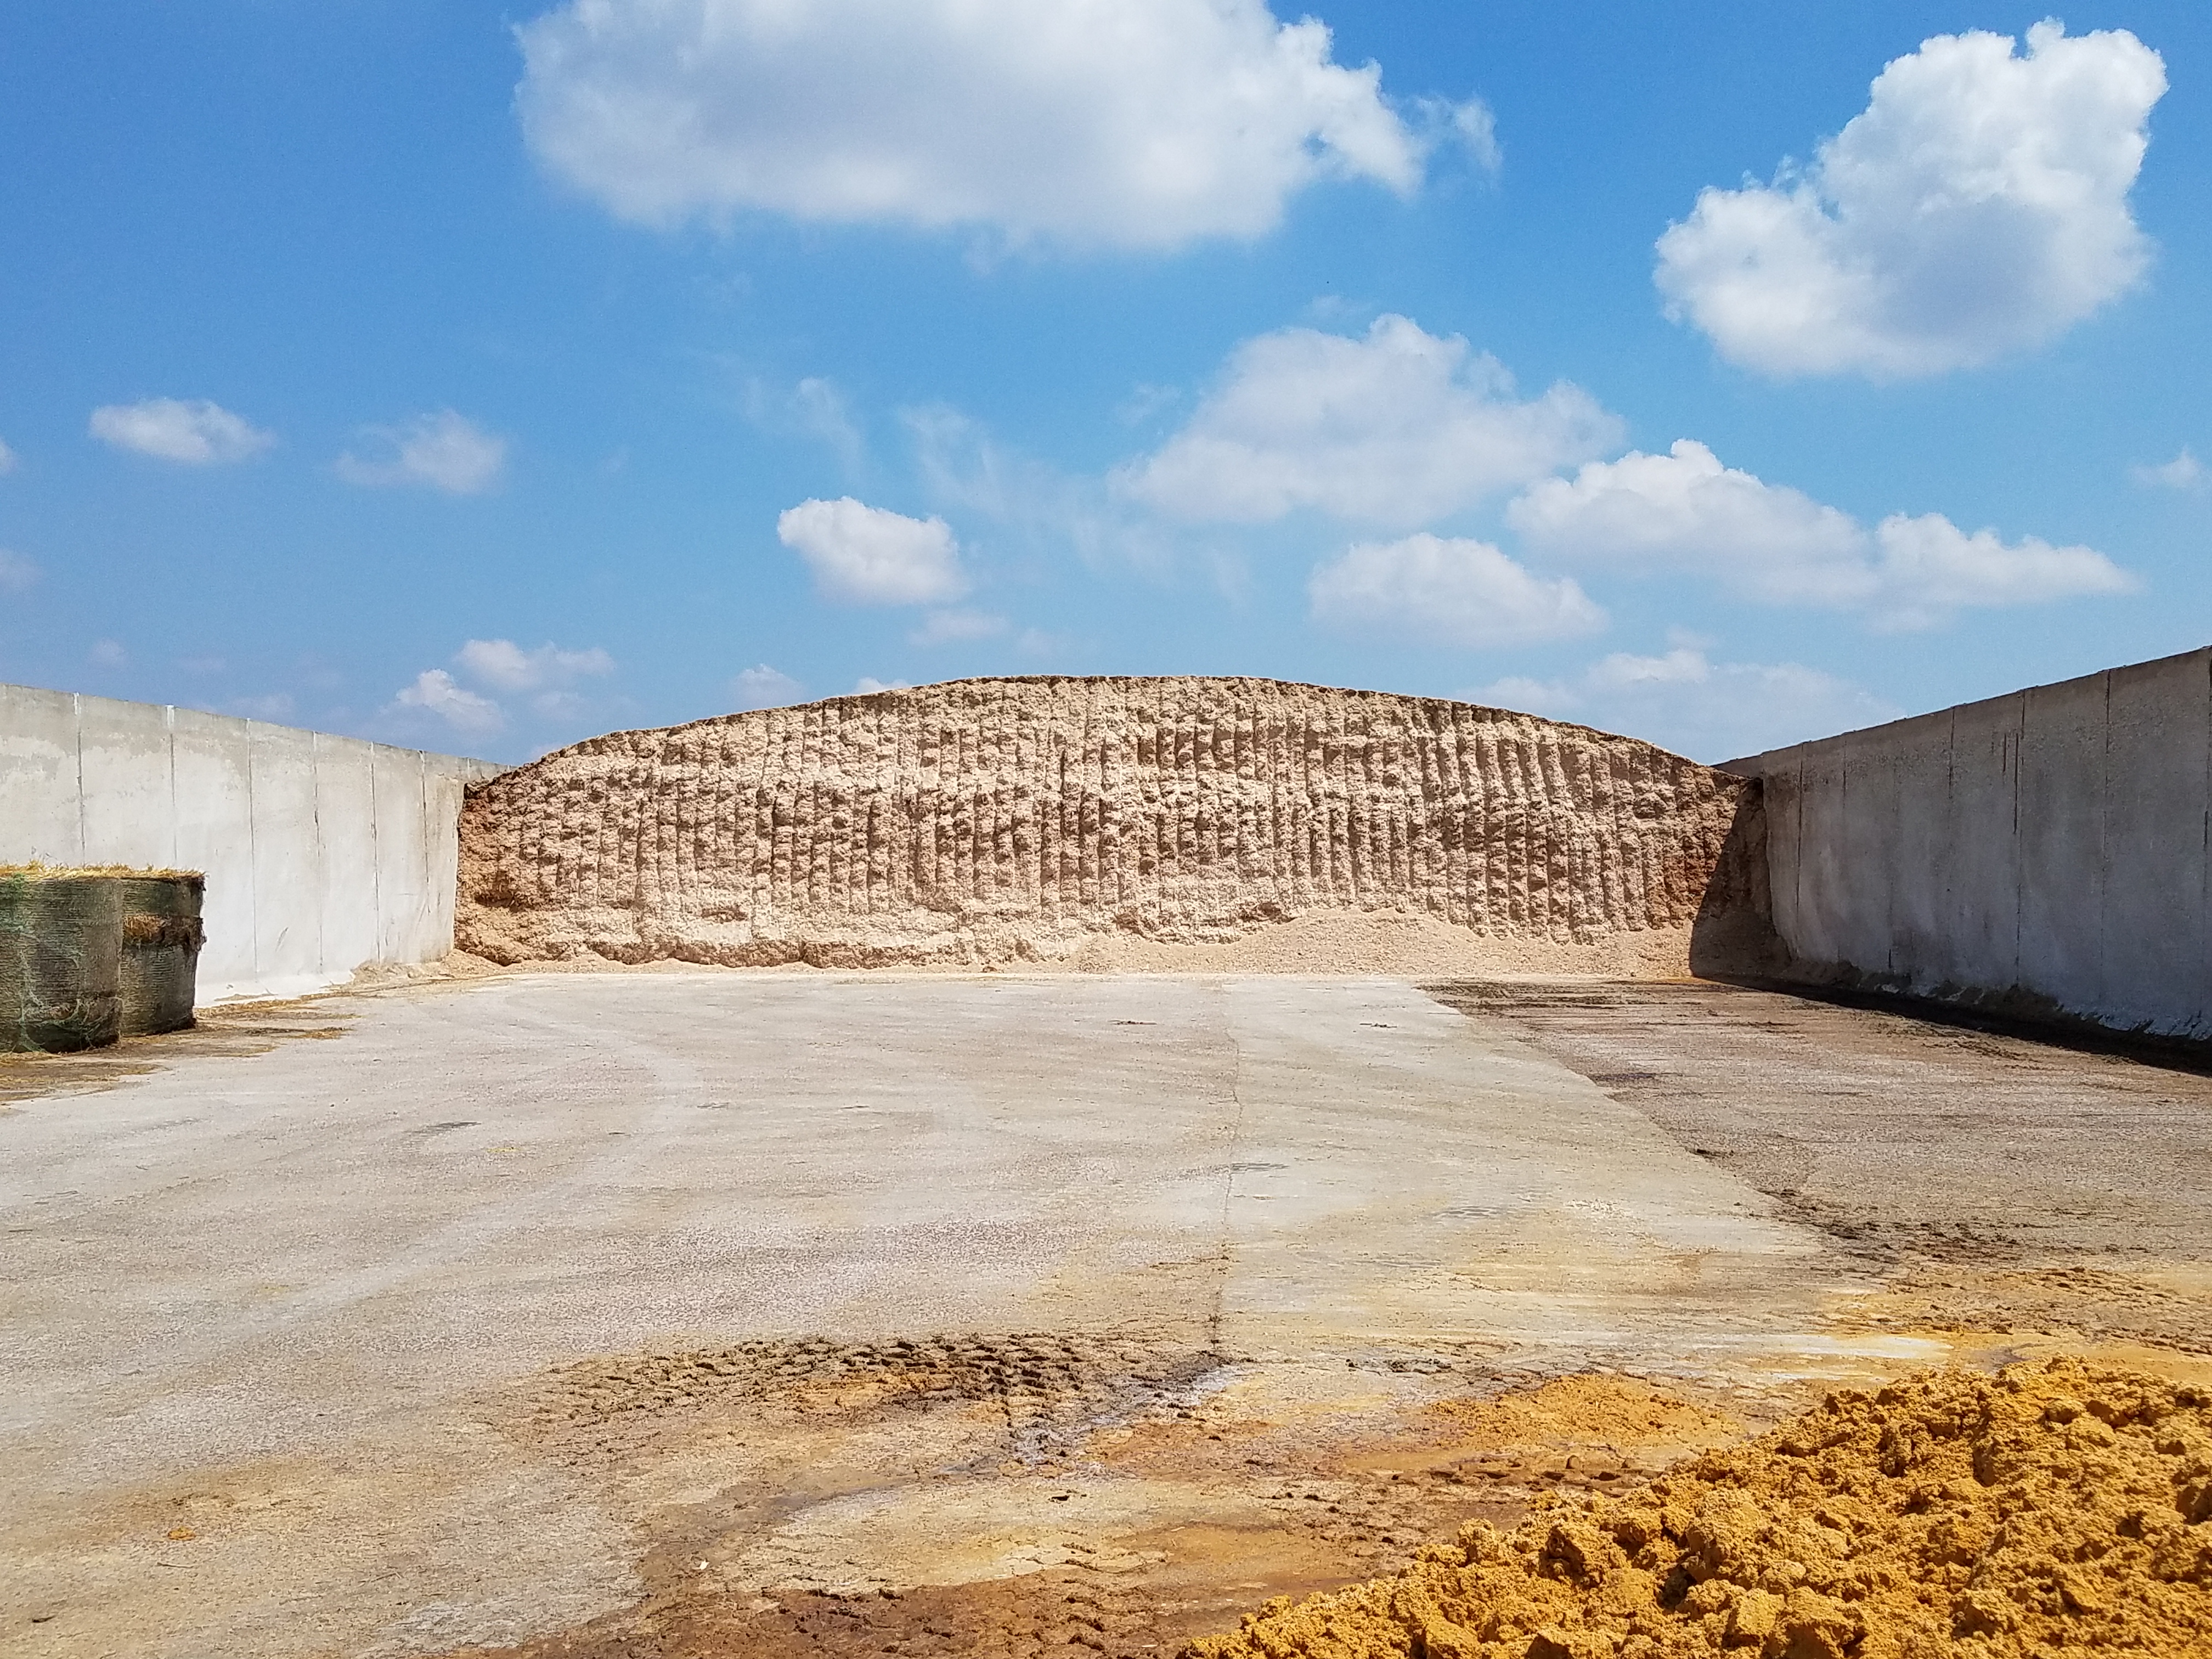 High-moisture corn being stored in a bunker for use as cattle feed.